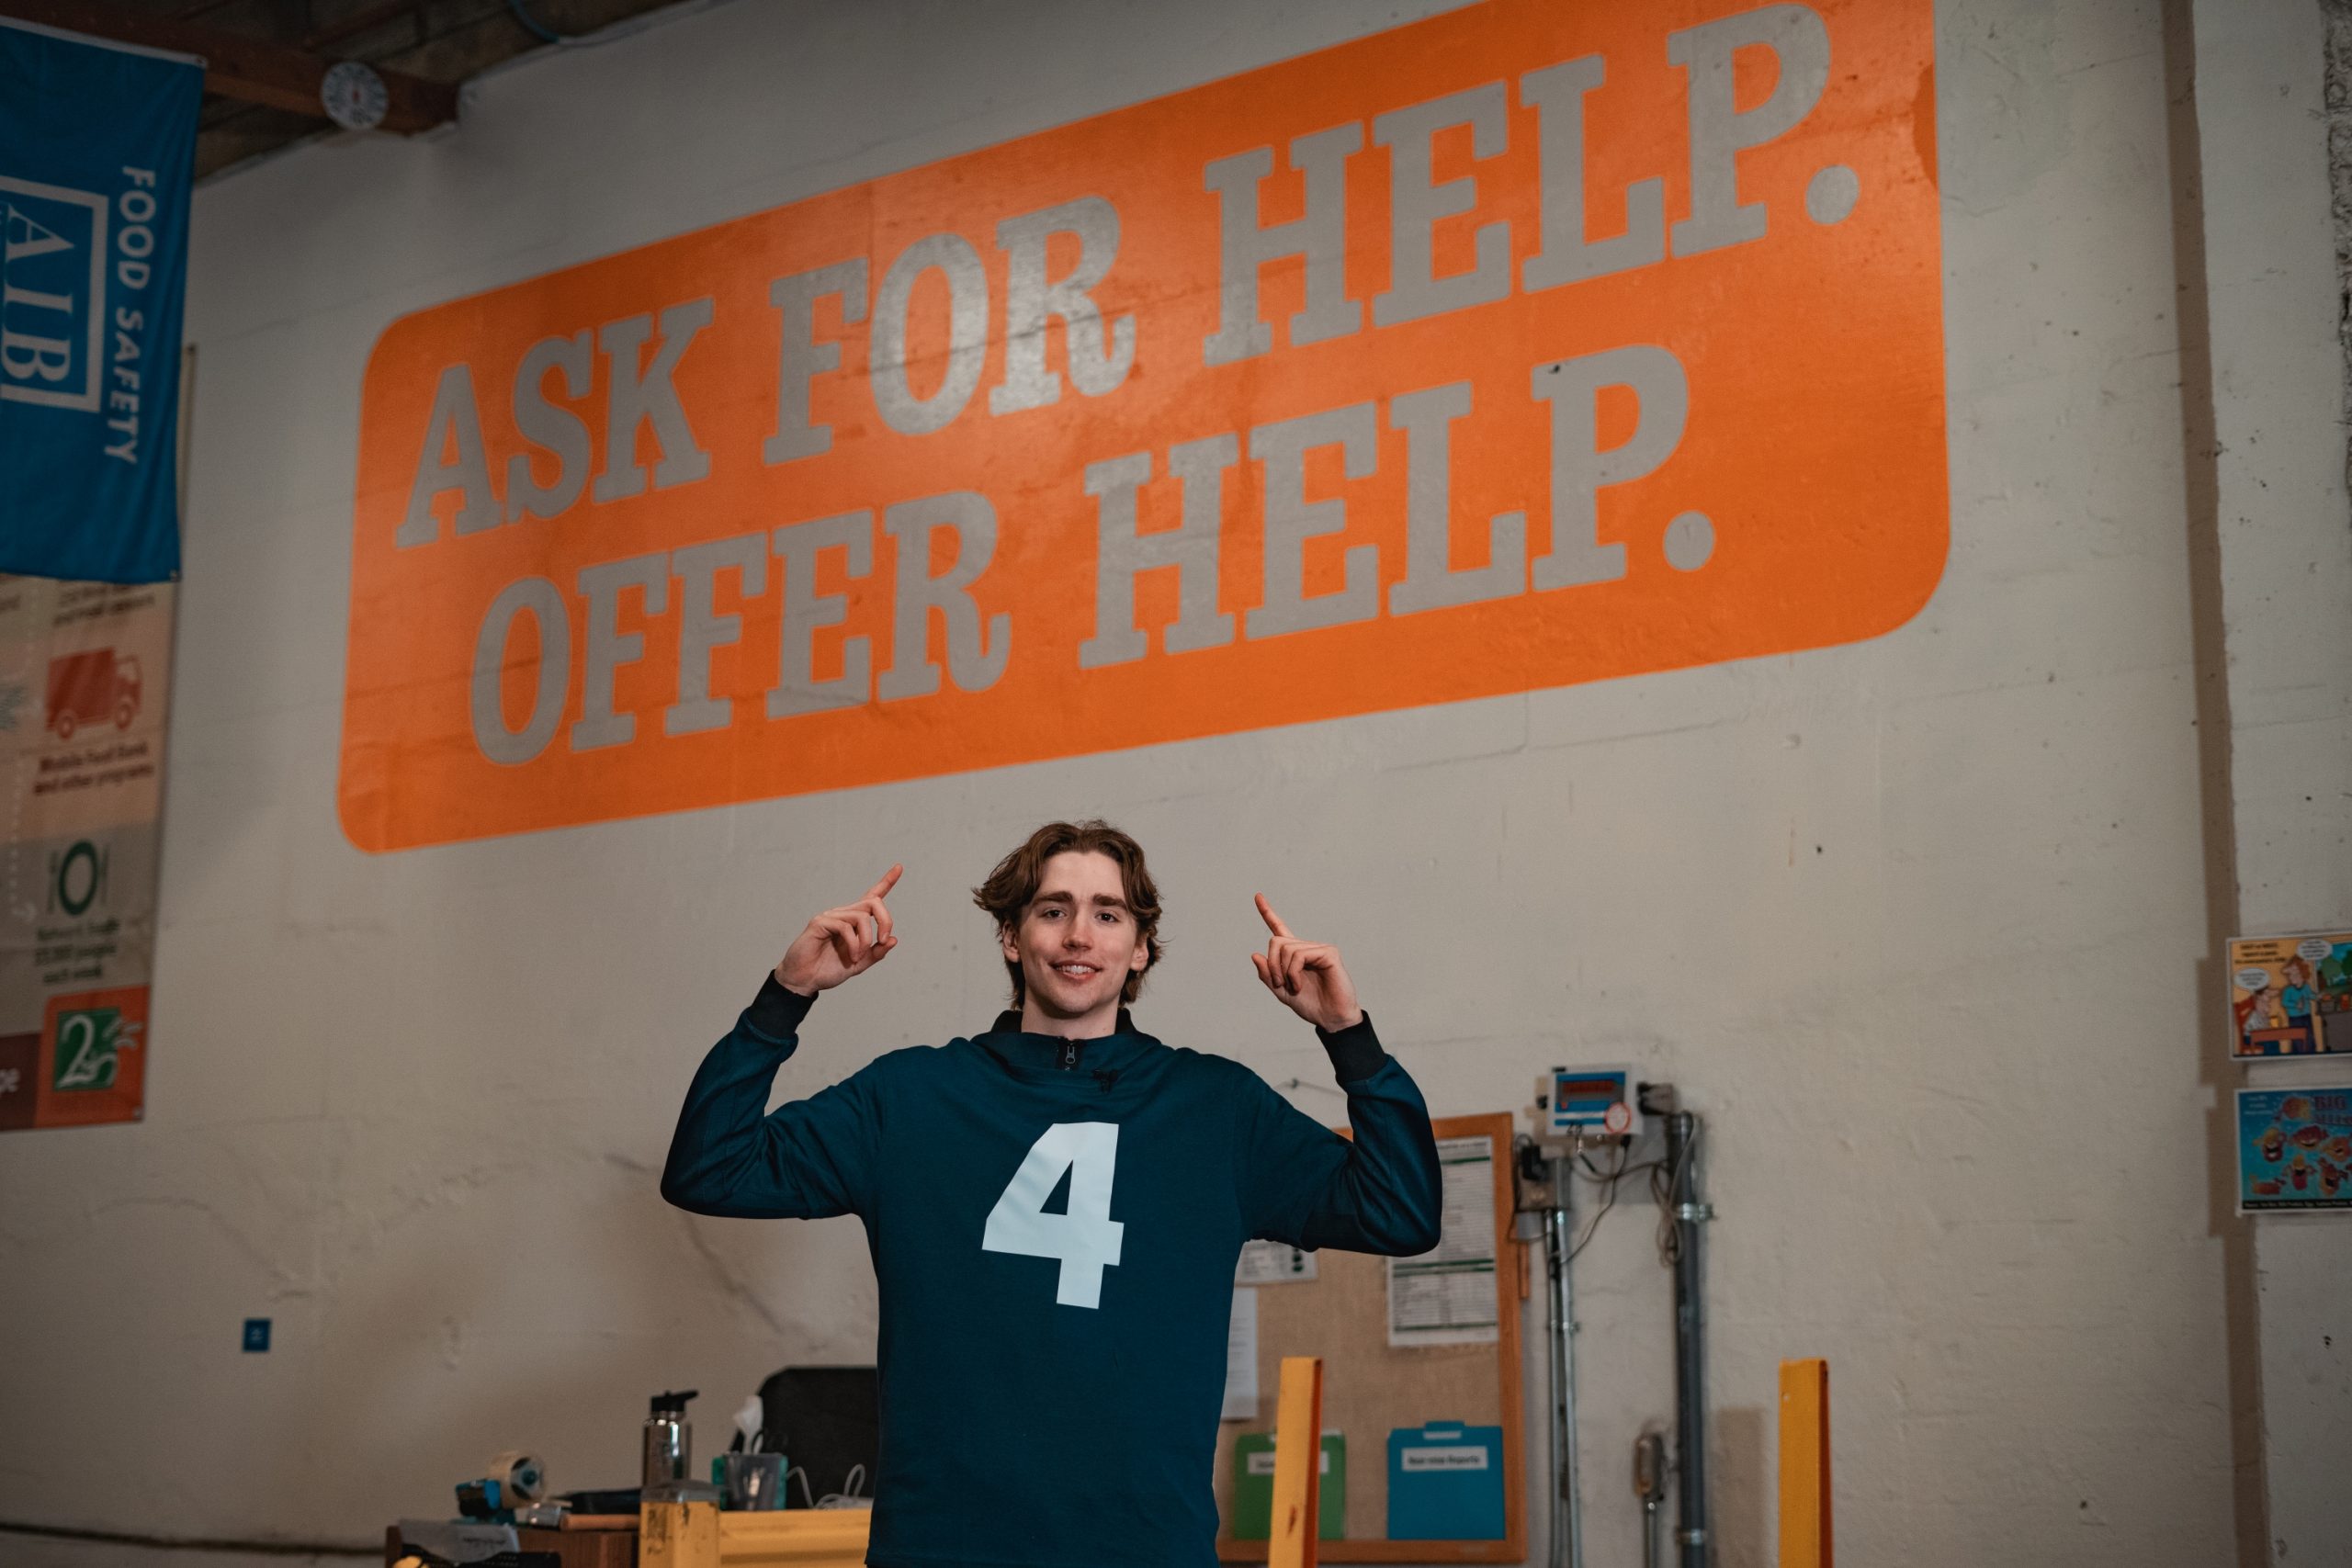 Dusty Stromer, Gonzaga basketball player, poses in the Second Harvest Warehouse in front of a mural reading, "Ask for help. Offer help."